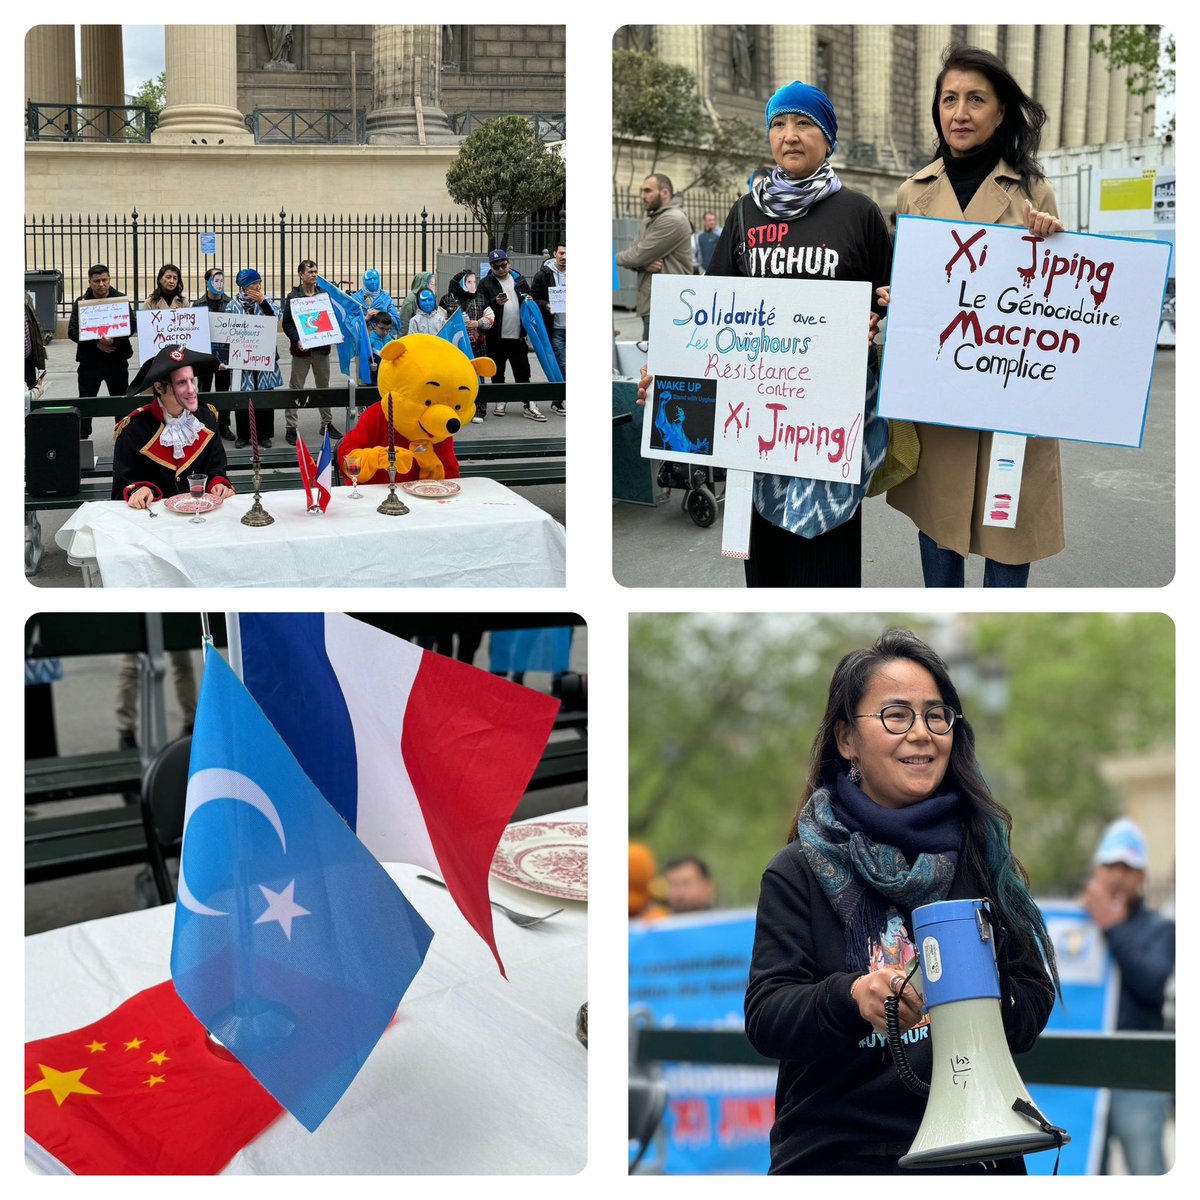 Upon Genocidal Xi's arrival in France, Uyghurs organized a creative demonstration against his visit, coordinated by the Europe Uyghur Institute. Many thanks to @DilnurReyhan and @Institutouïghourd'Europe